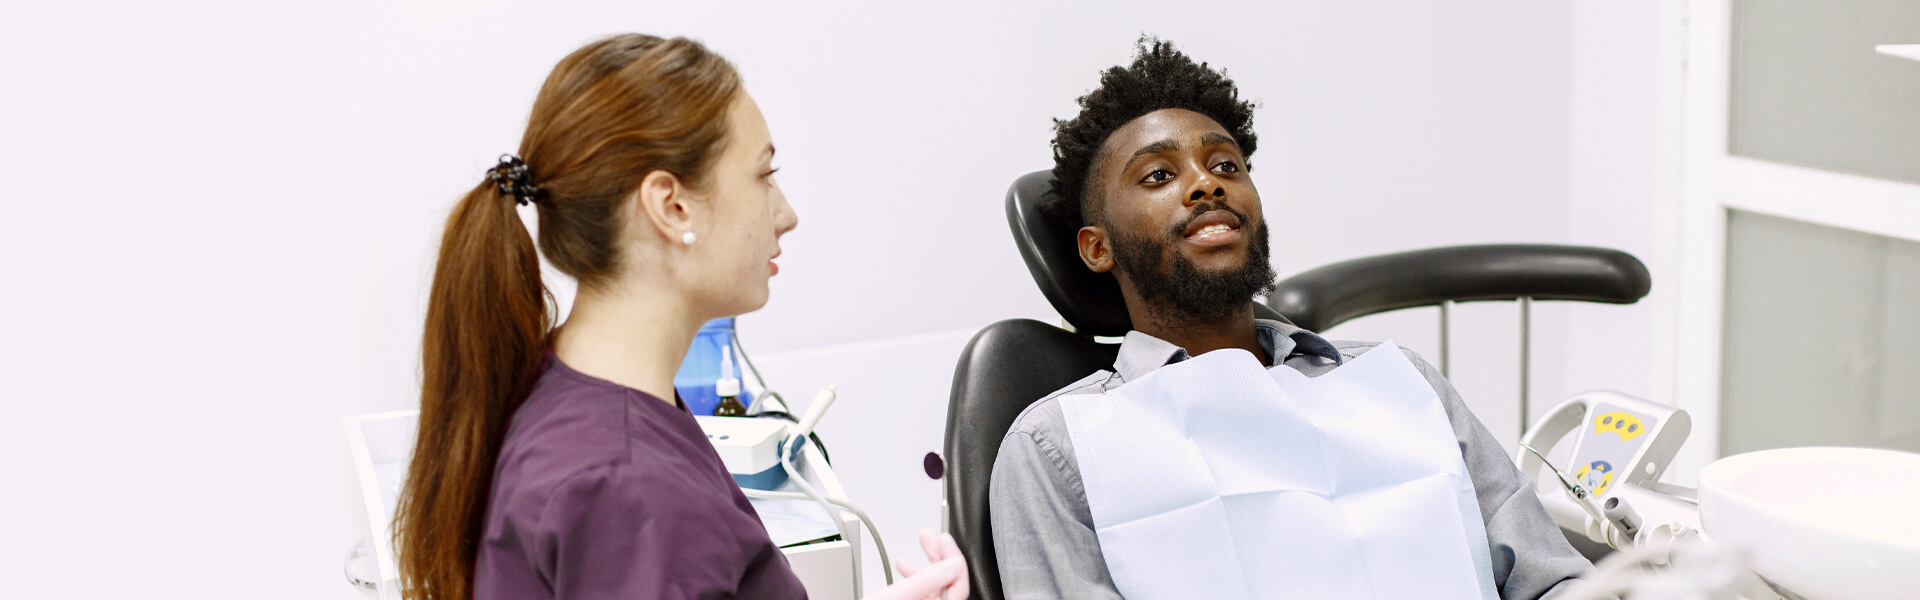 Preventive Dental Exams and Cleanings Help Safeguard Your Overall Health and Save Money